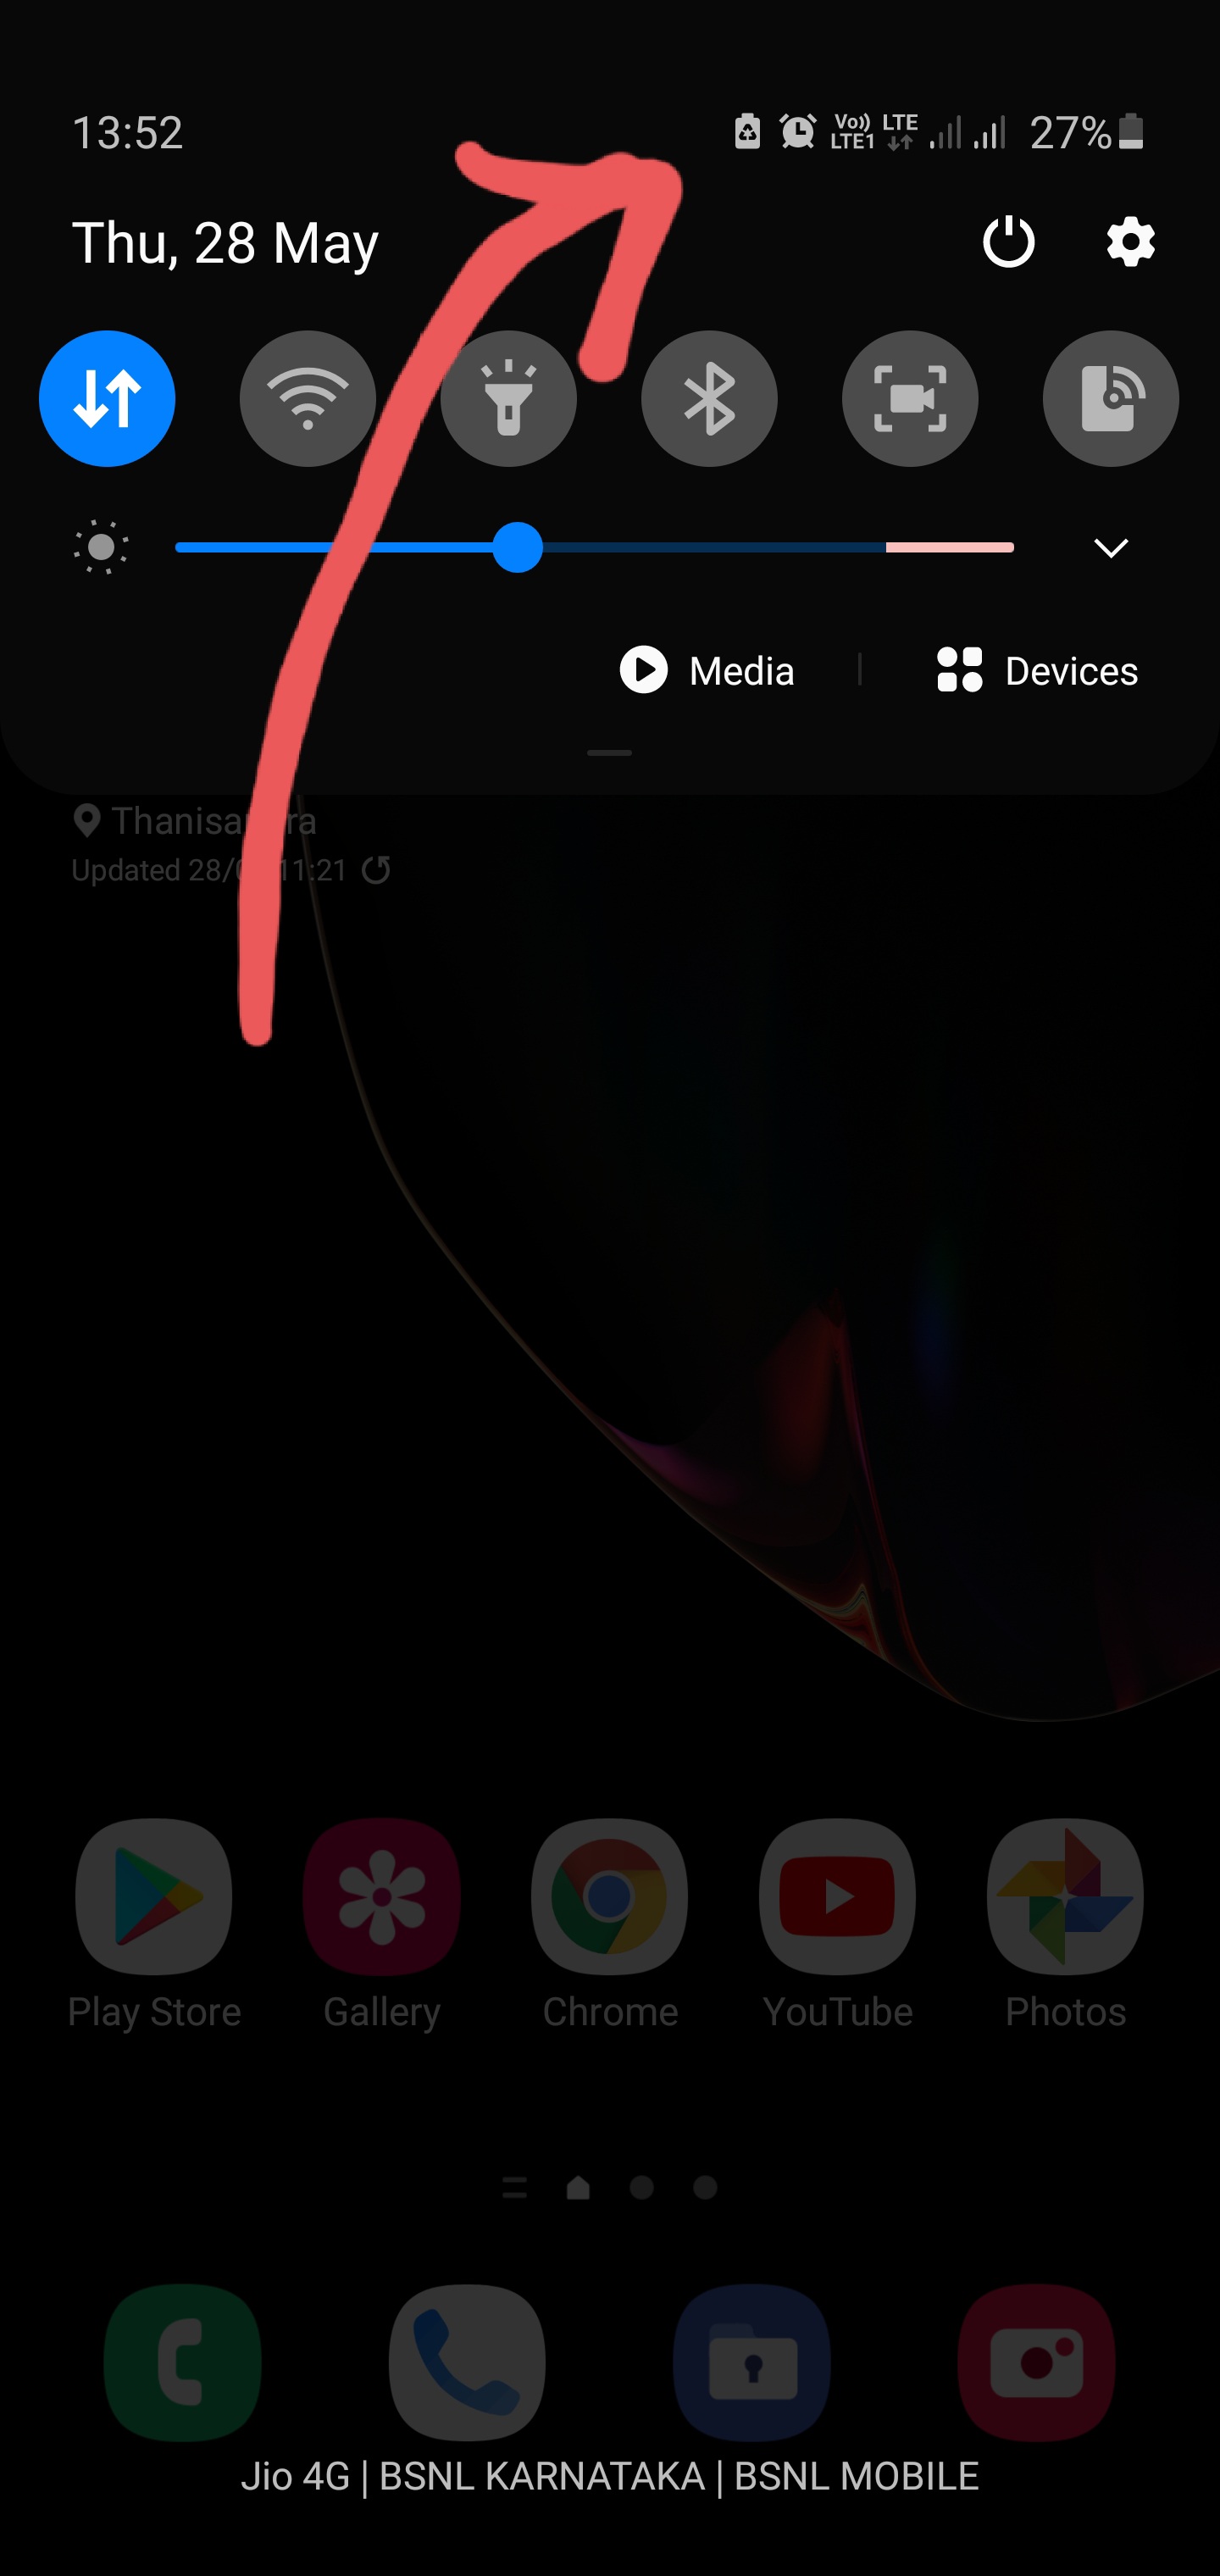 New Battery icon with a triangle in middle showing... - Samsung Members